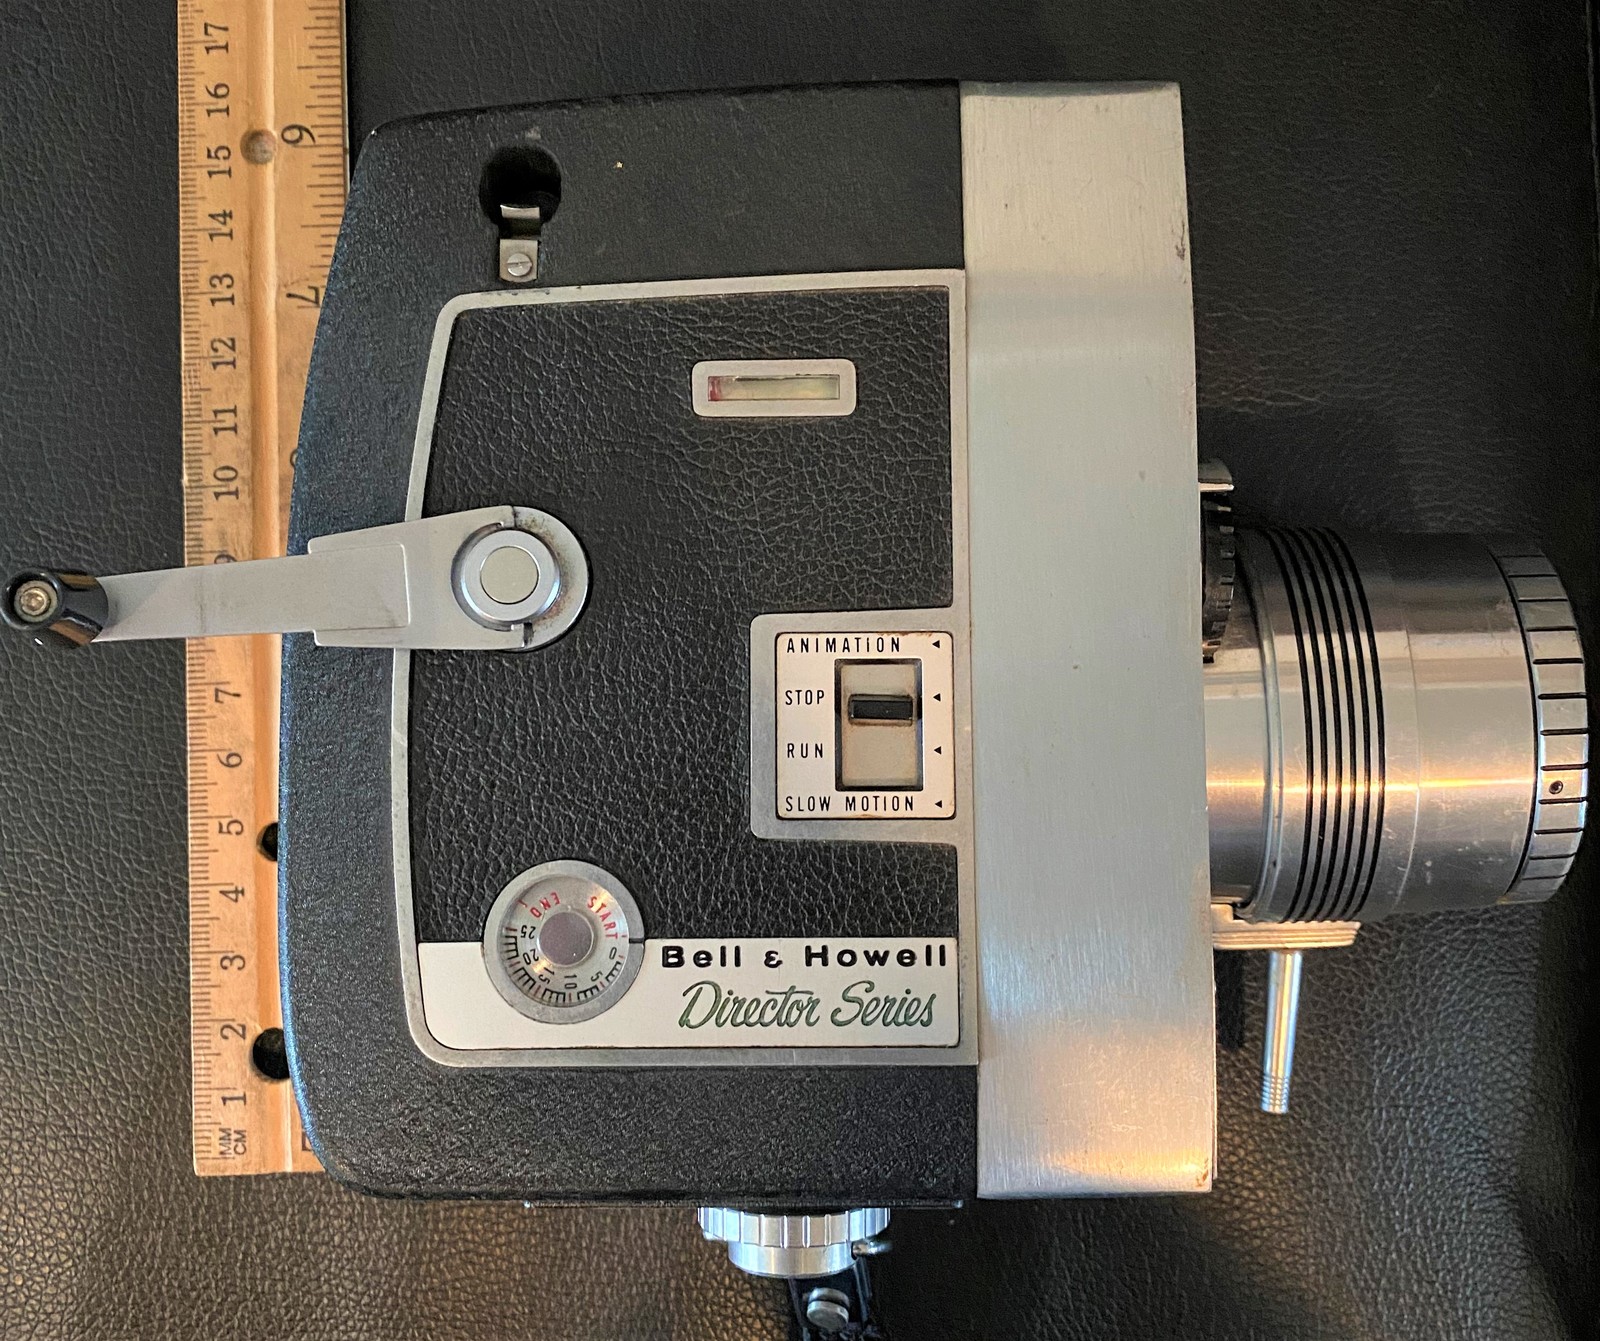 Bell & Howell 424 Perpetua Zoomatic 8mm Movie Camera - 1961  - $65.00